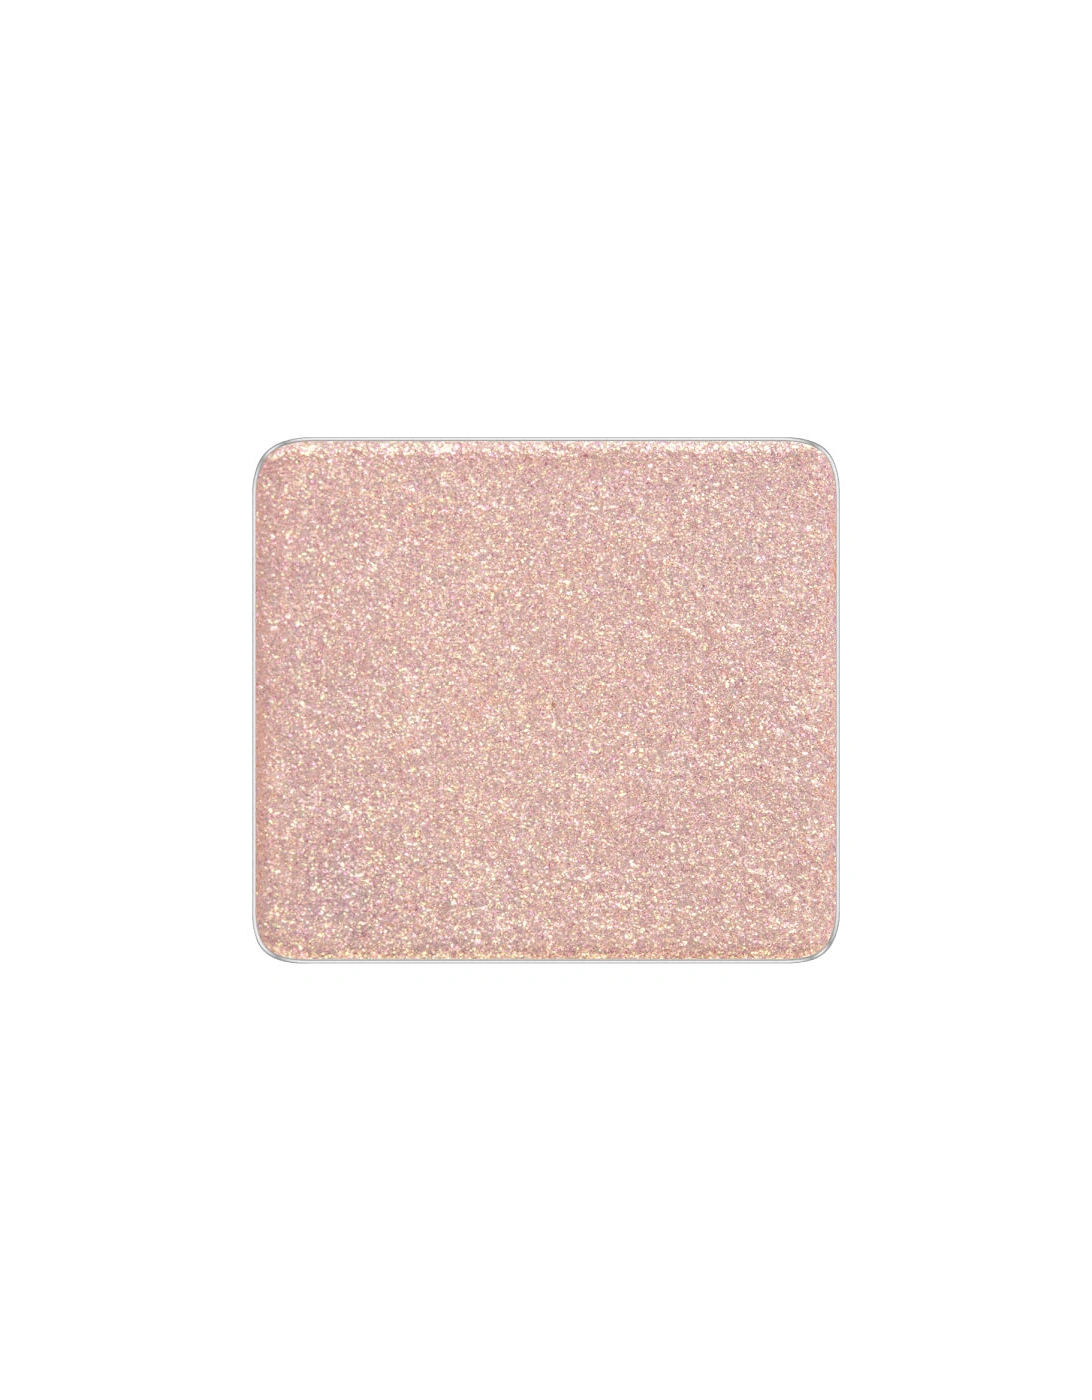 Freedom System Creamy Pigment Eye Shadow - Cheers 705, 2 of 1